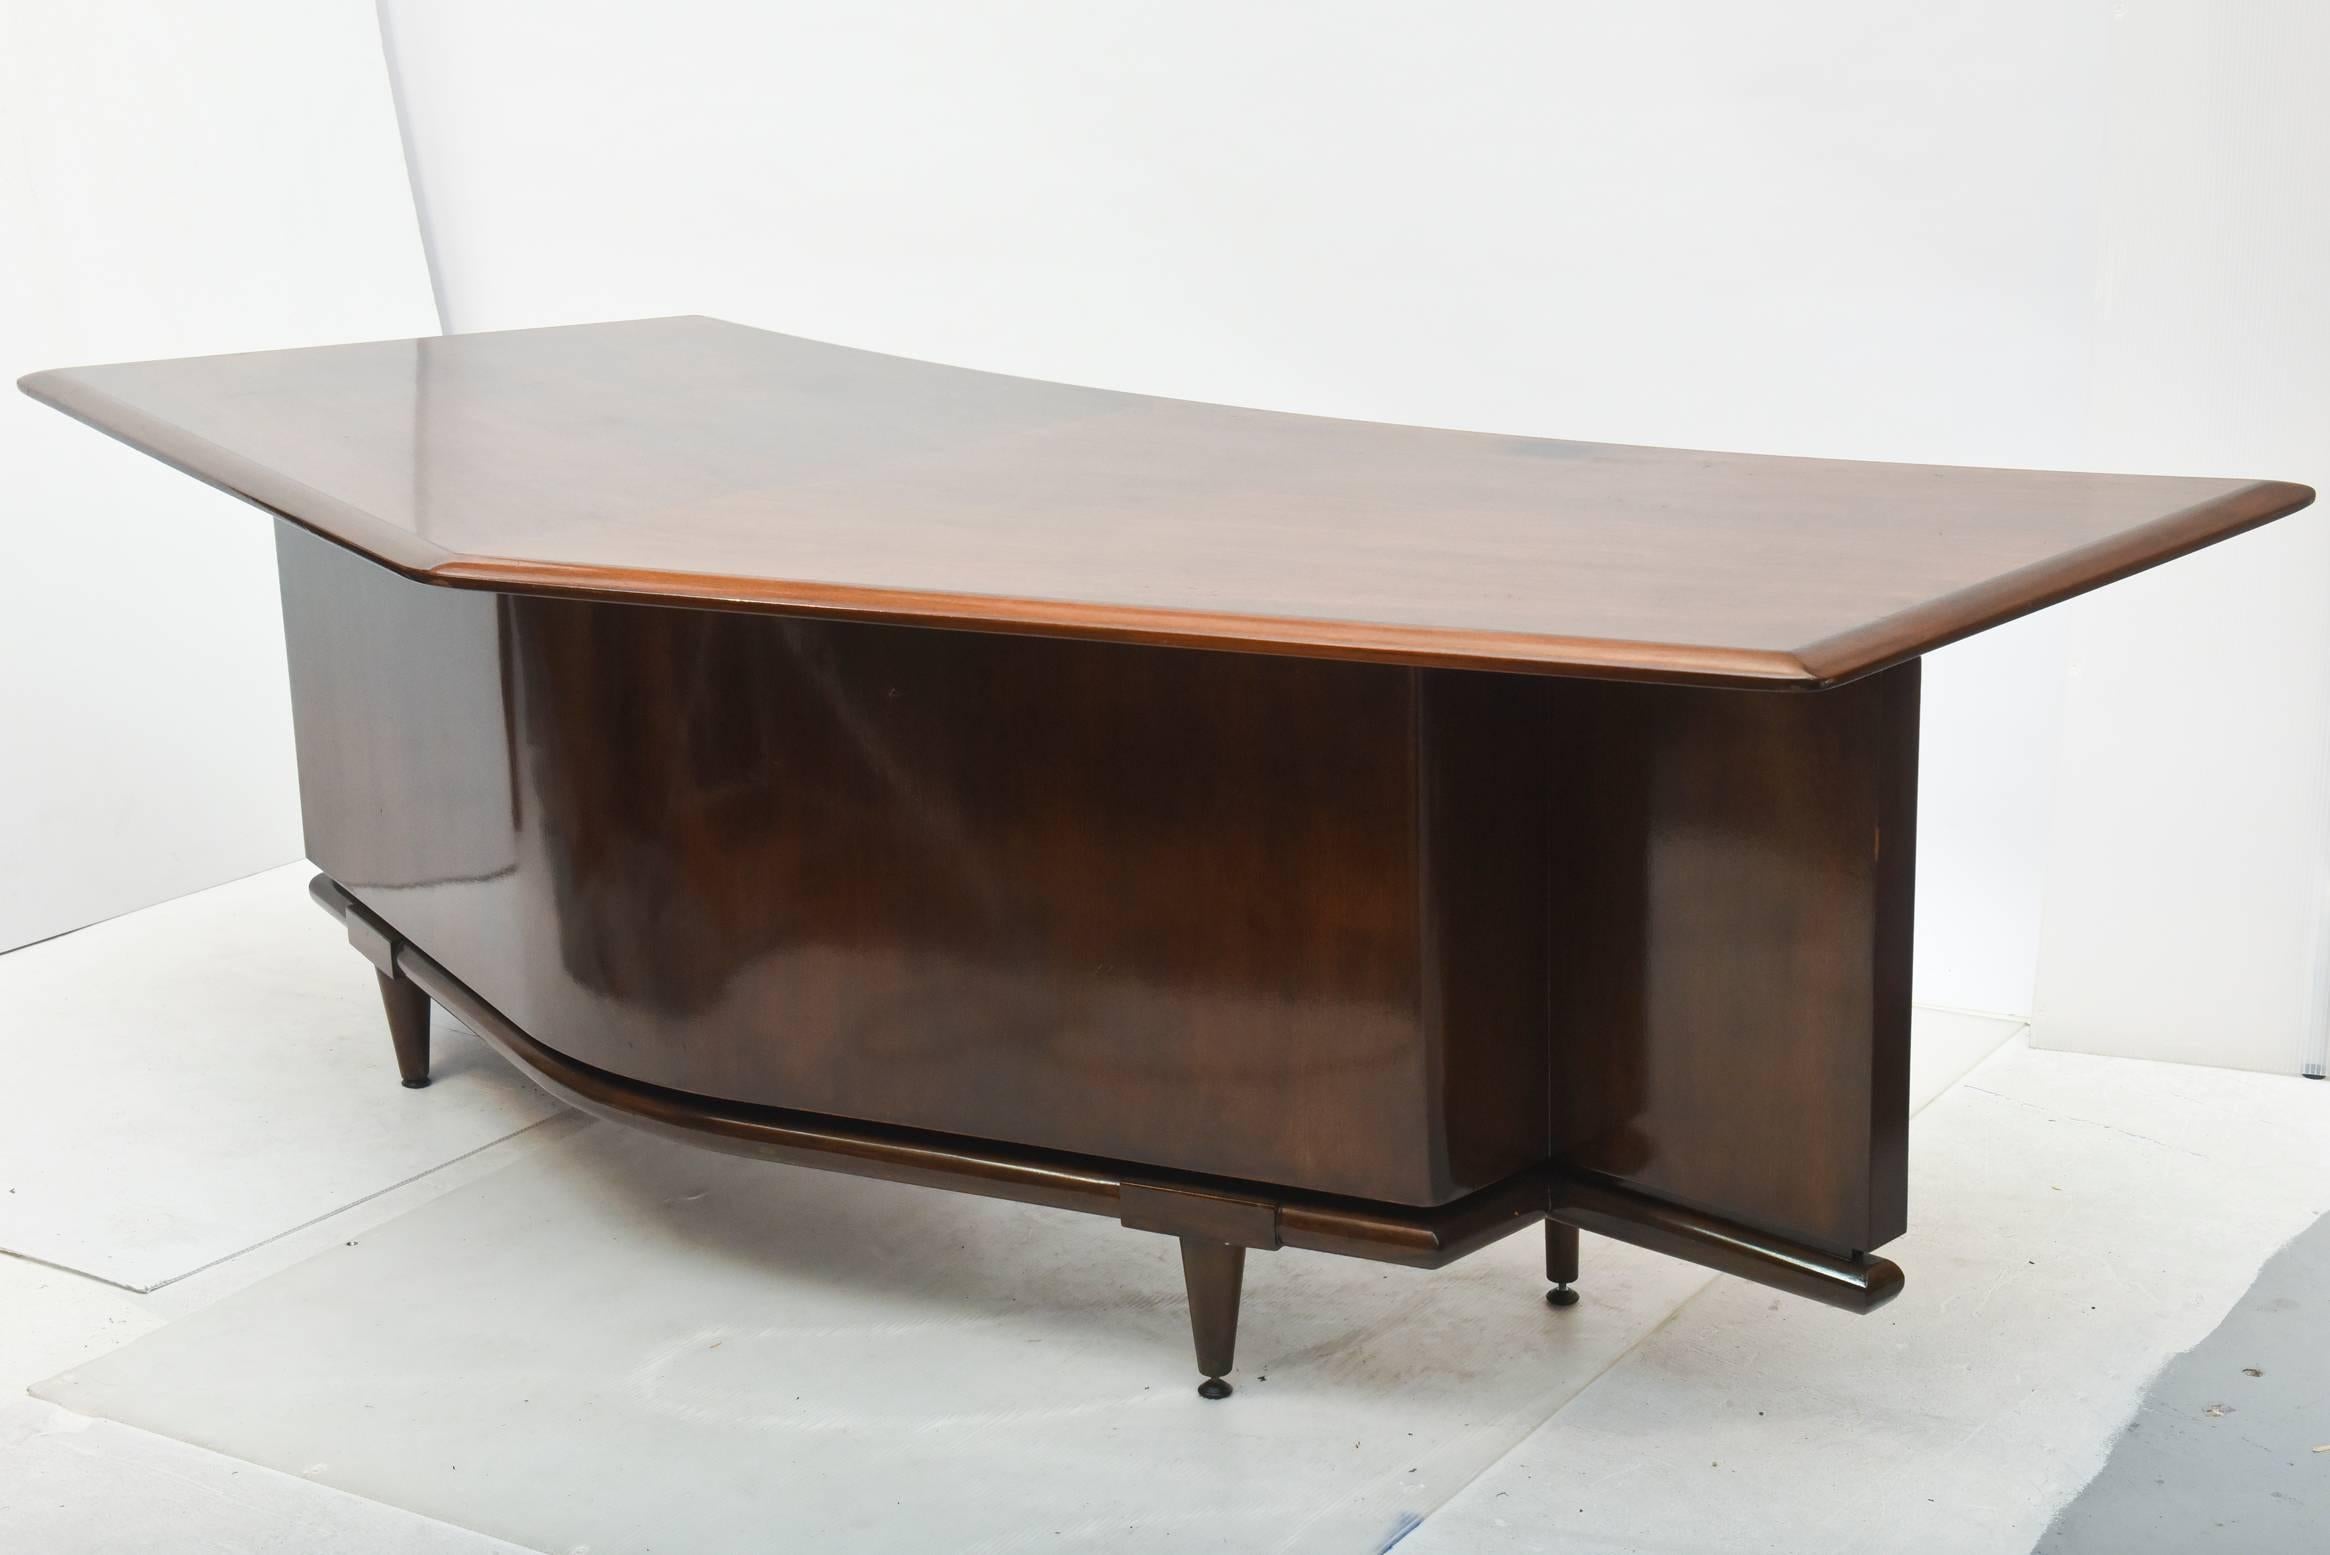 the chevron shaped top above a conforming body with architectural details, with three drawers and a long pencil drawer, with an addition large/ file drawer, on round tapering legs
provenance the estate of Steve McQueen, thence by descent
small